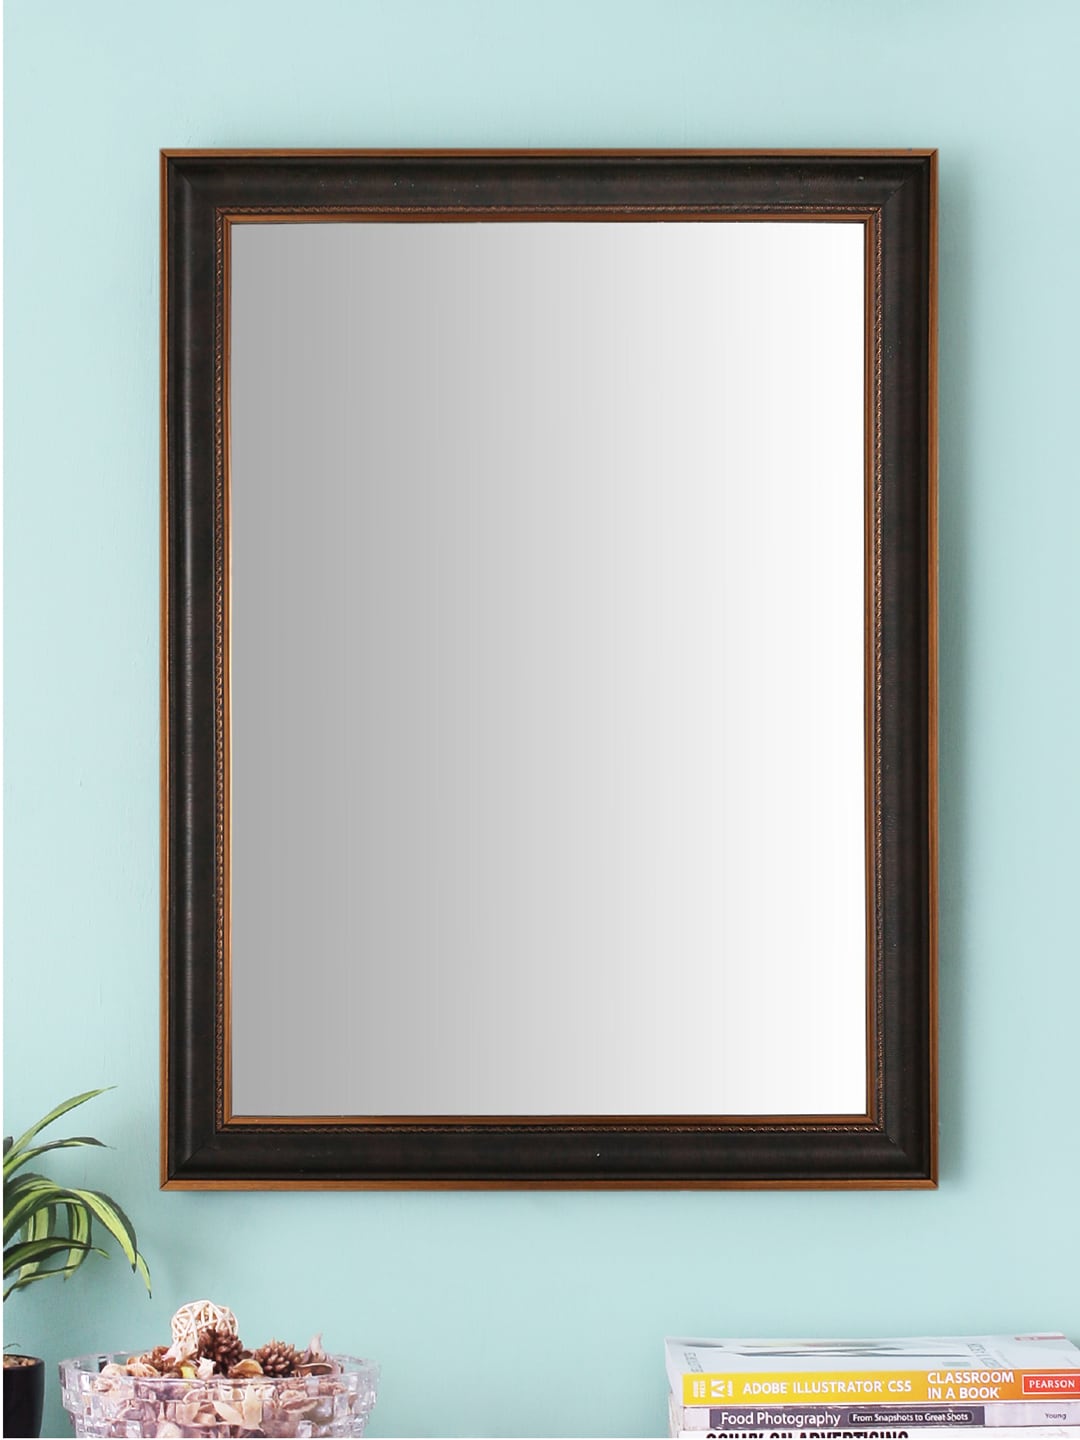 999Store Brown Fibre Wall Mirror Price in India